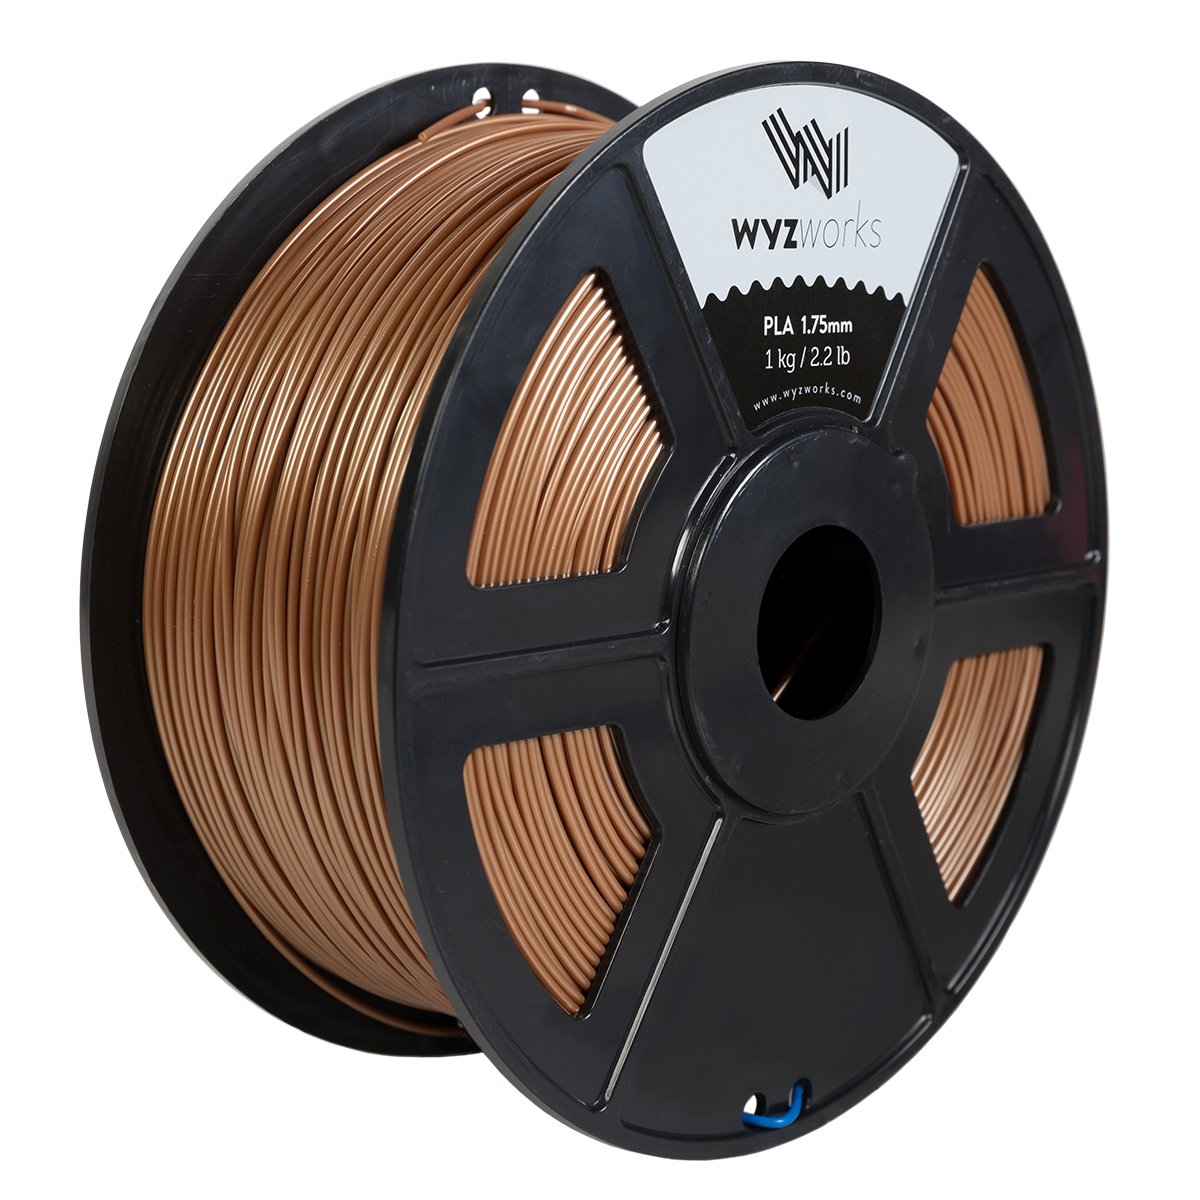 WYZworks PLA 1.75mm [ COPPER ] Premium Thermoplastic Polylactic Acid 3D Printer Filament - Dimensional Accuracy +/- 0.05mm 1kg / 2.2lb + [ Multiple Color Options Available ]